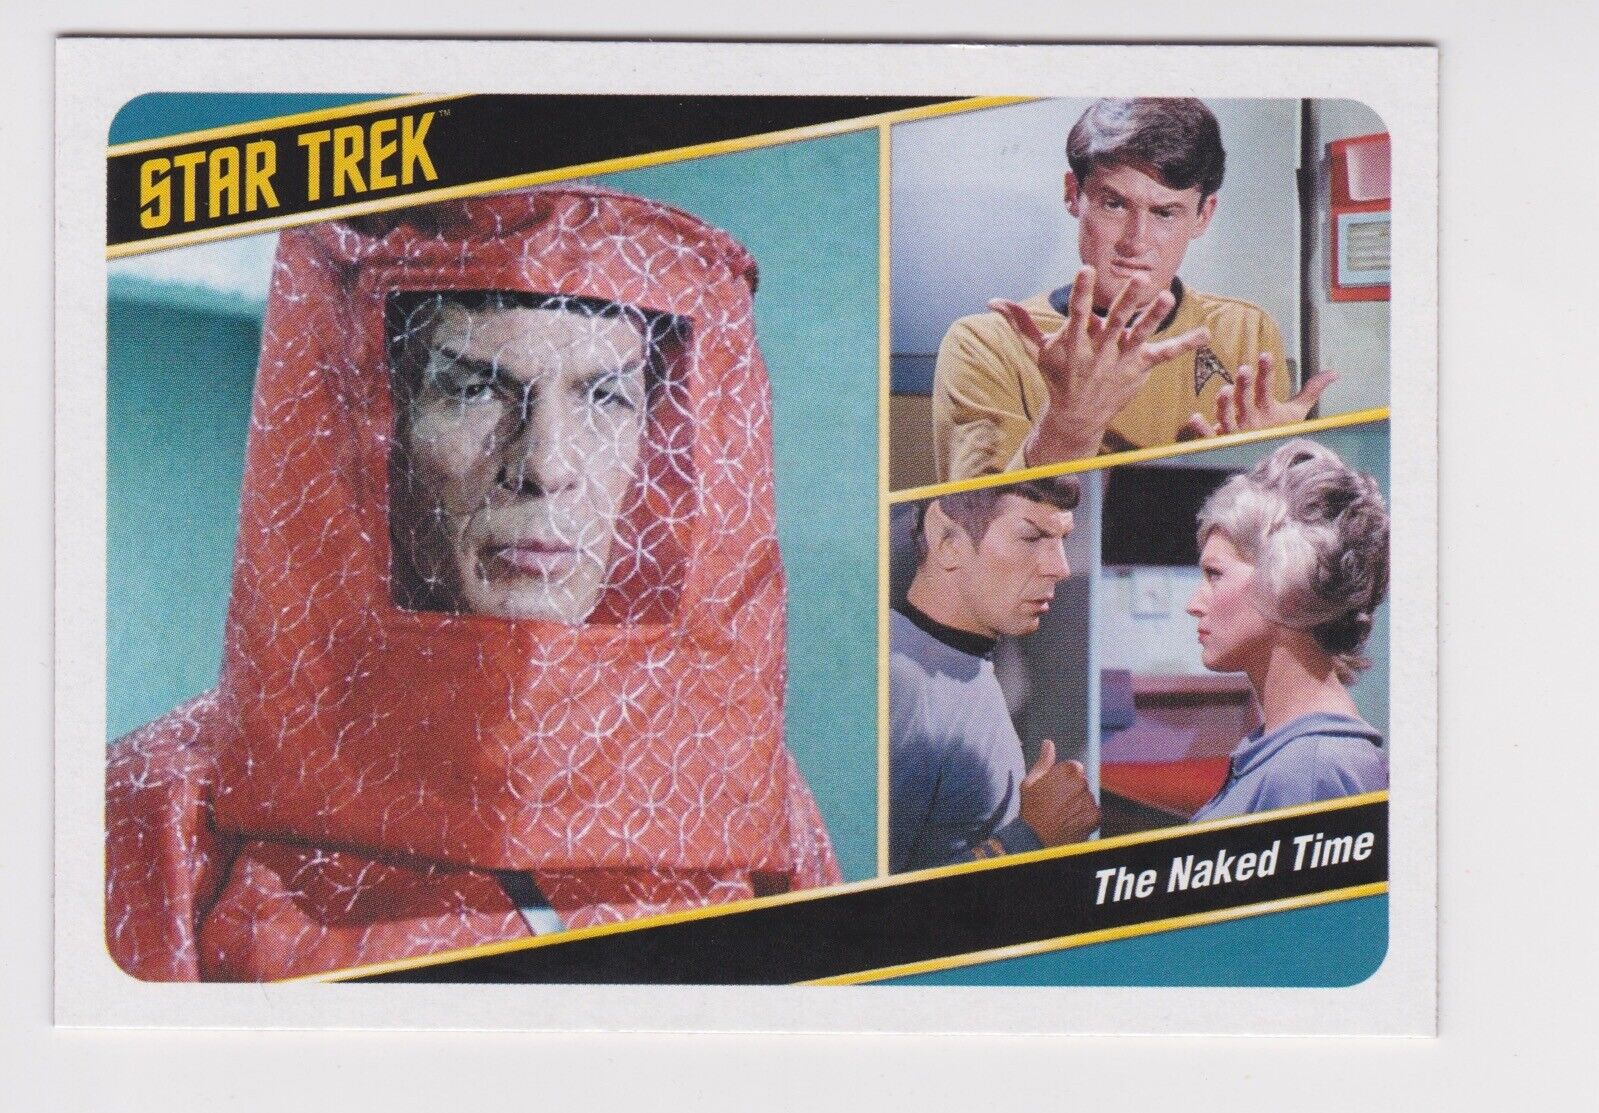 2018 Star Trek TOS Captains Collection Retro Throwback #7 The Naked Time